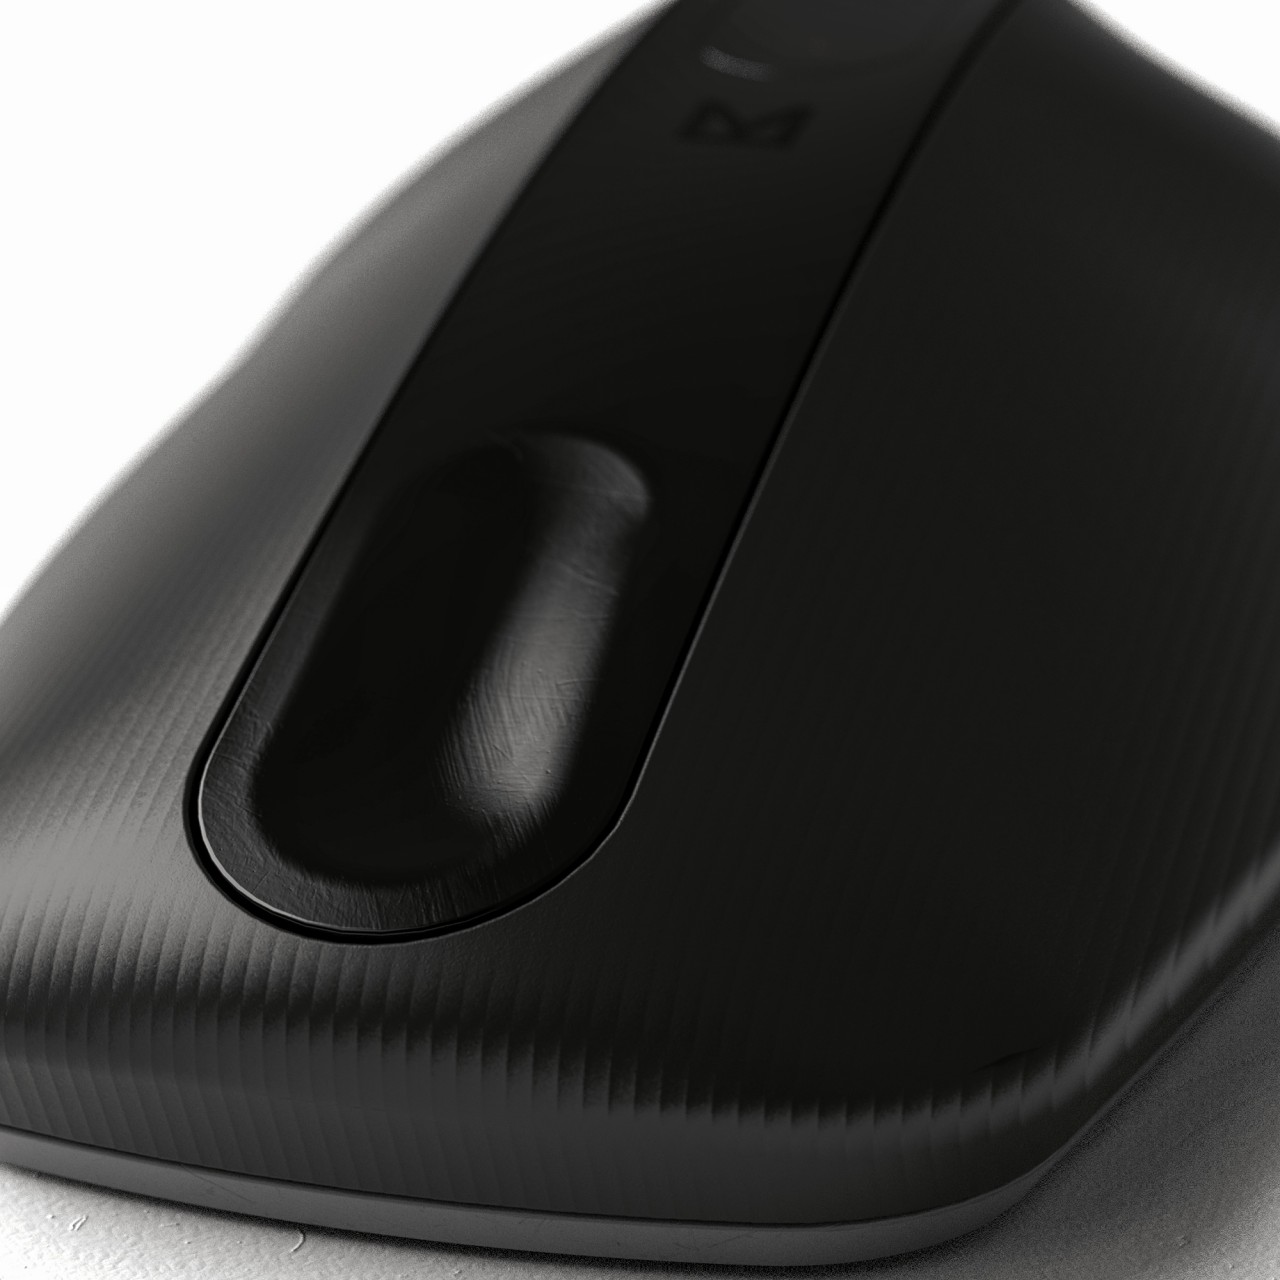 This mouse concept ditches the buttons for a more tactile experience